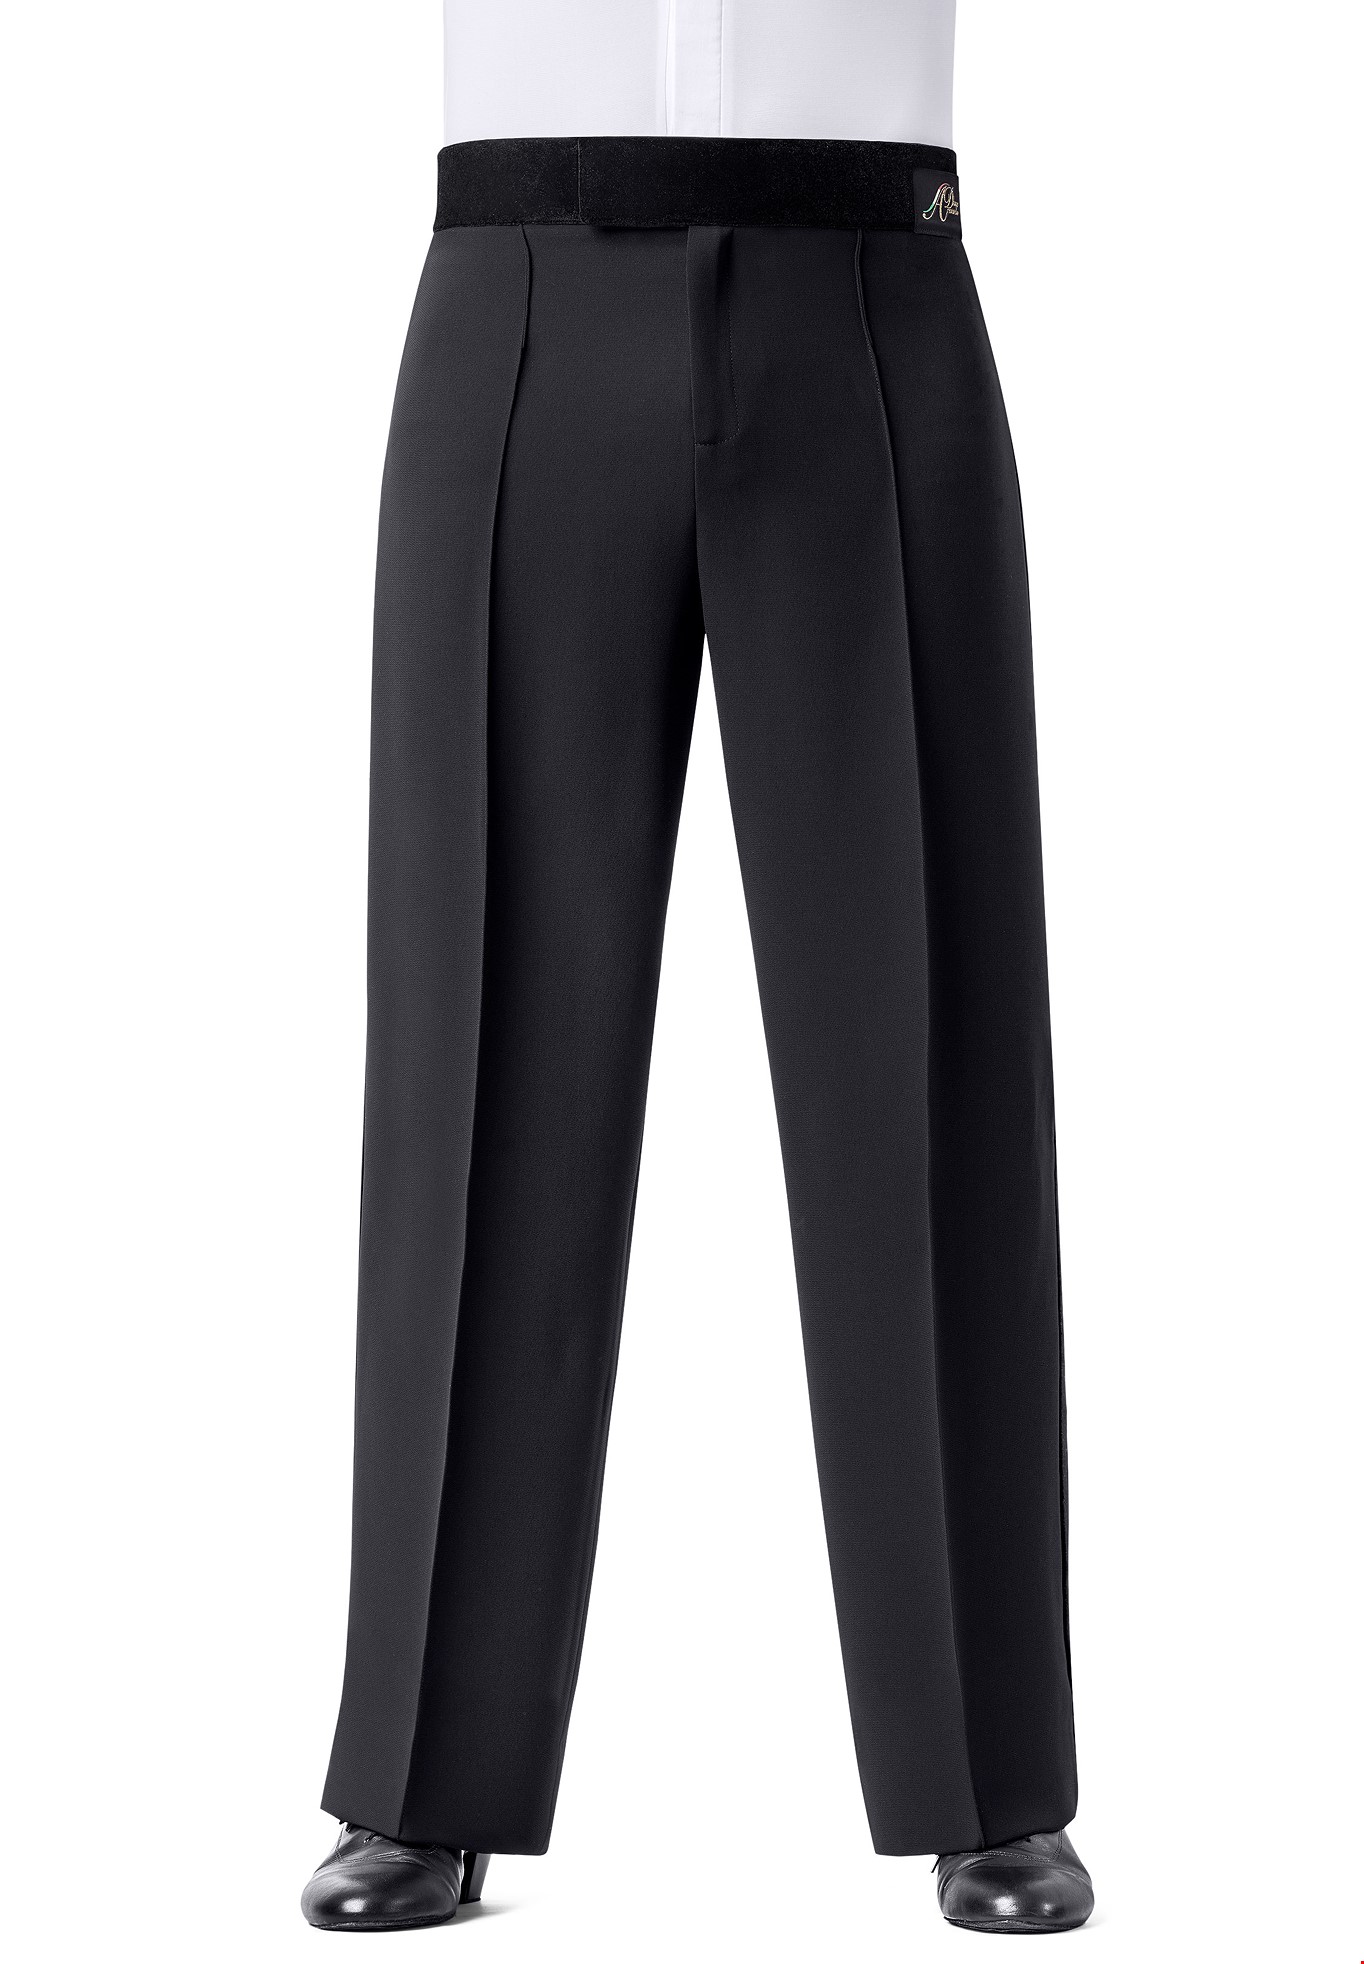 Men's Dance Pants, VEdance, VE Executive , $175.00, from VEdance